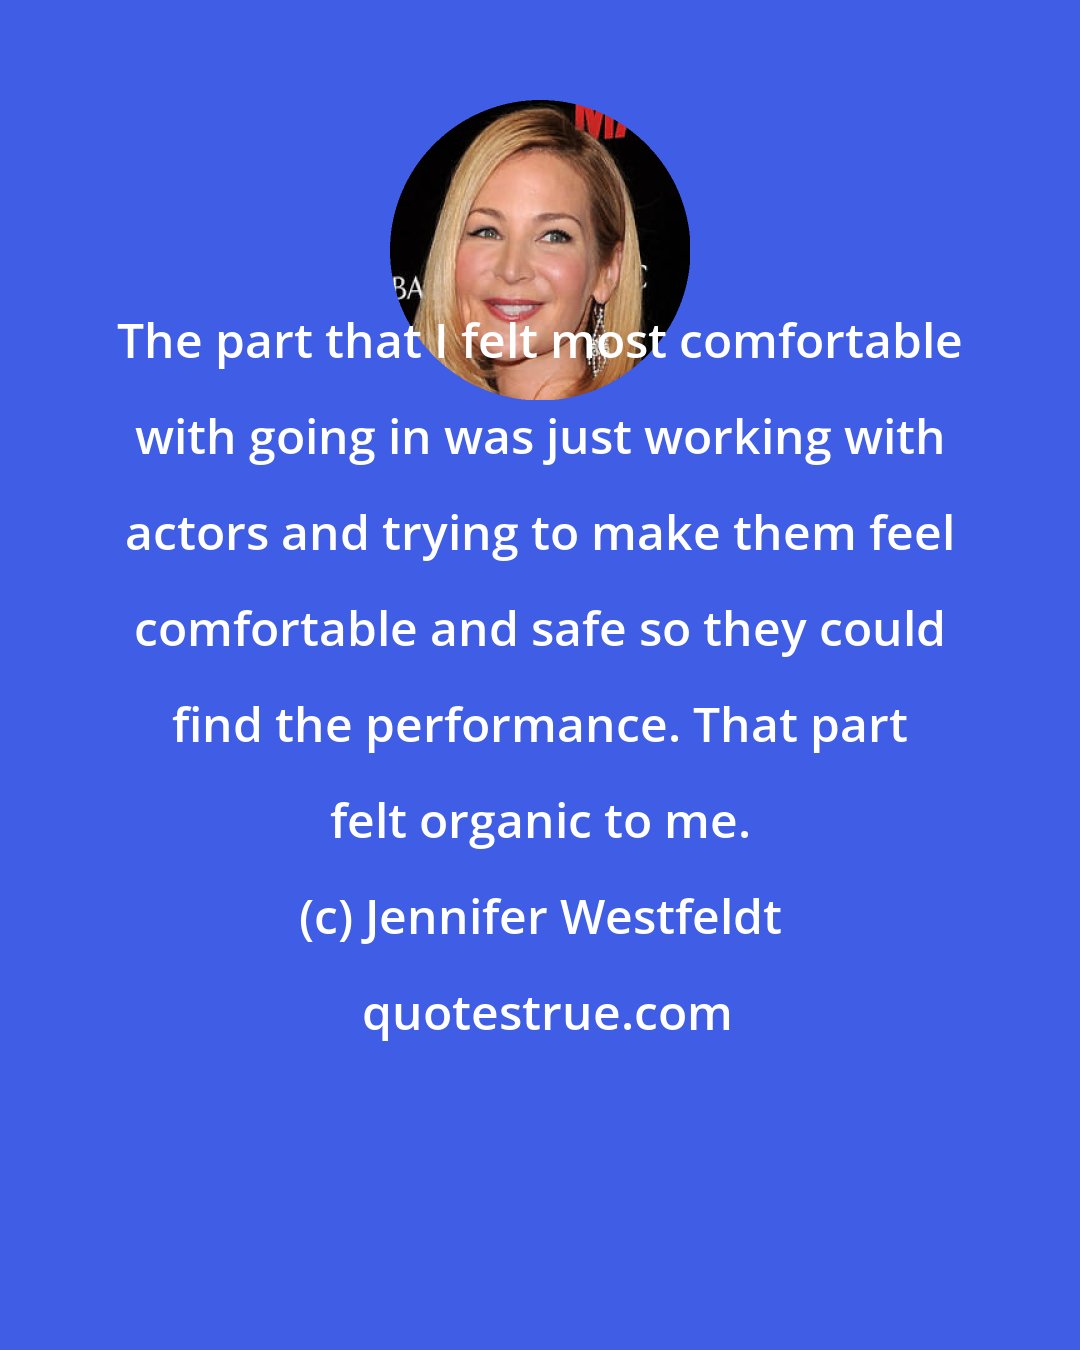 Jennifer Westfeldt: The part that I felt most comfortable with going in was just working with actors and trying to make them feel comfortable and safe so they could find the performance. That part felt organic to me.